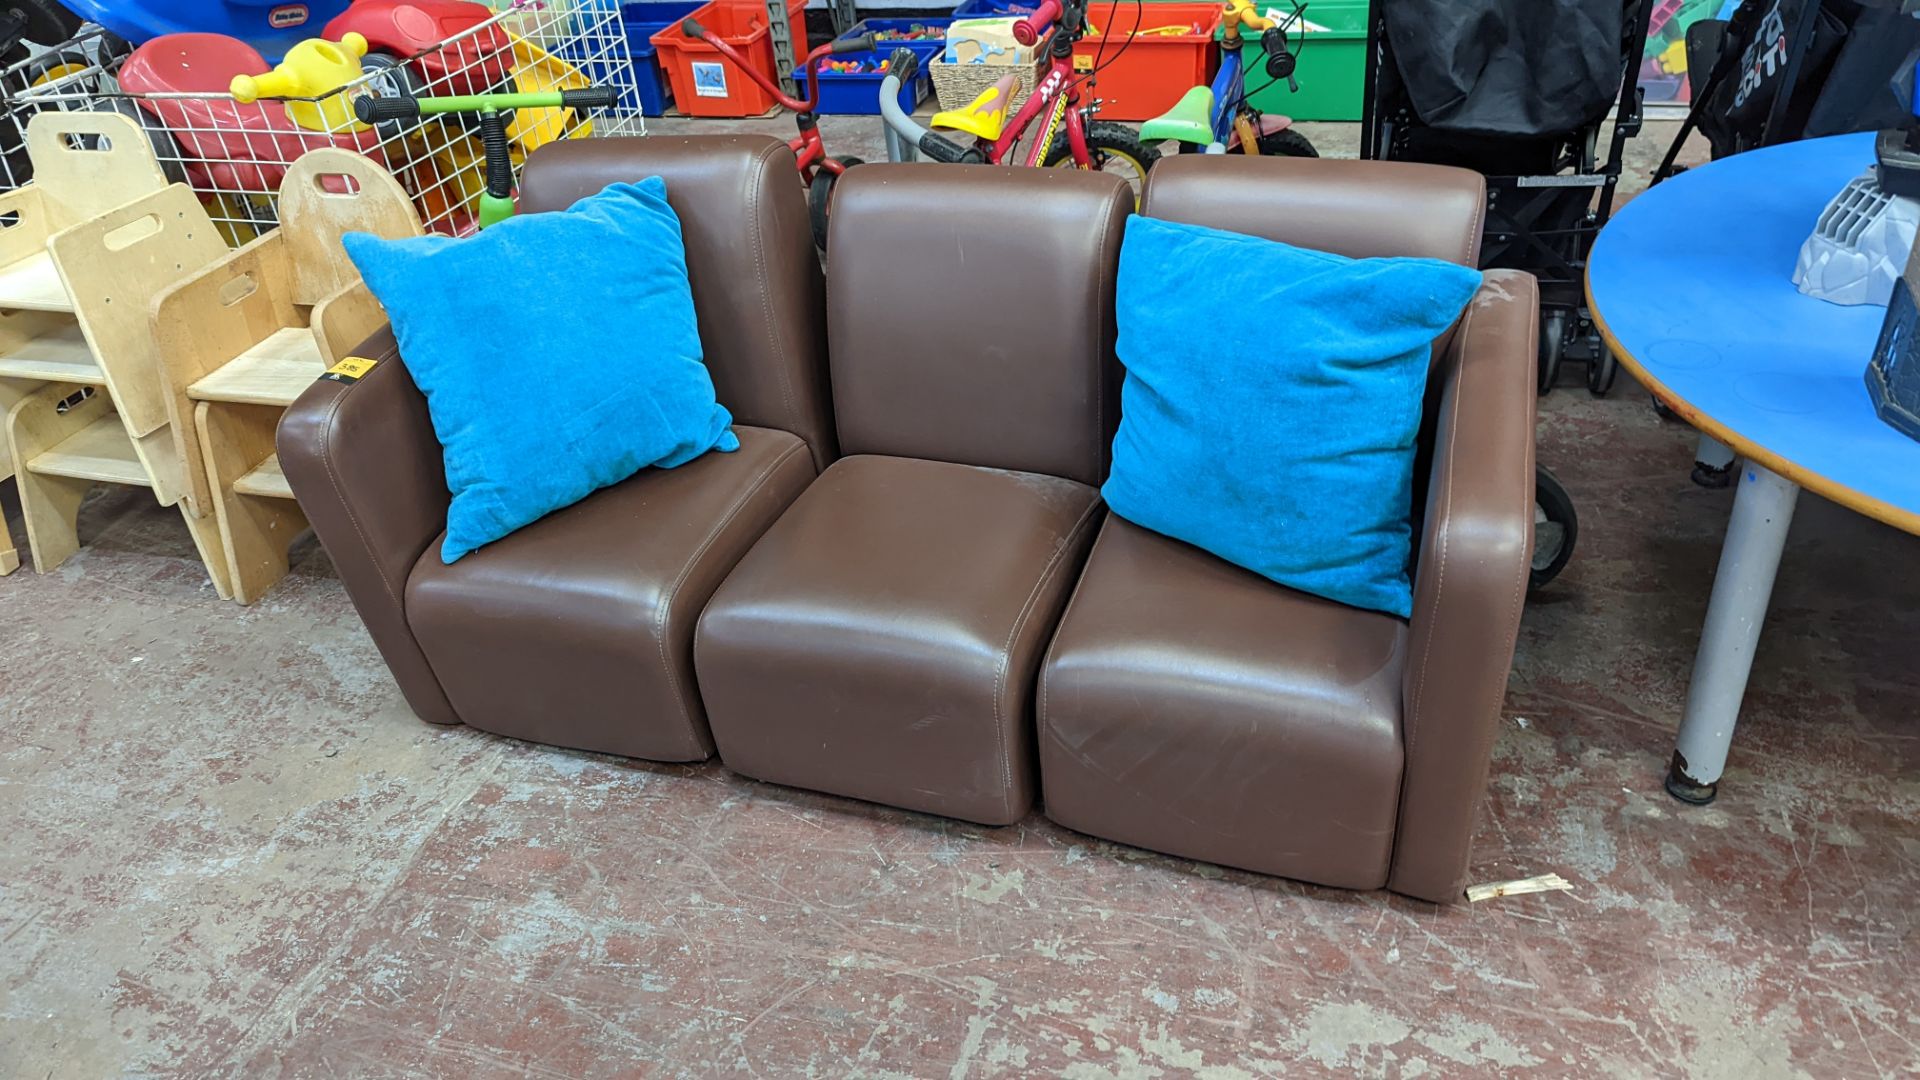 Small 3-piece children's sofa including 2 scatter cushions - Image 3 of 5